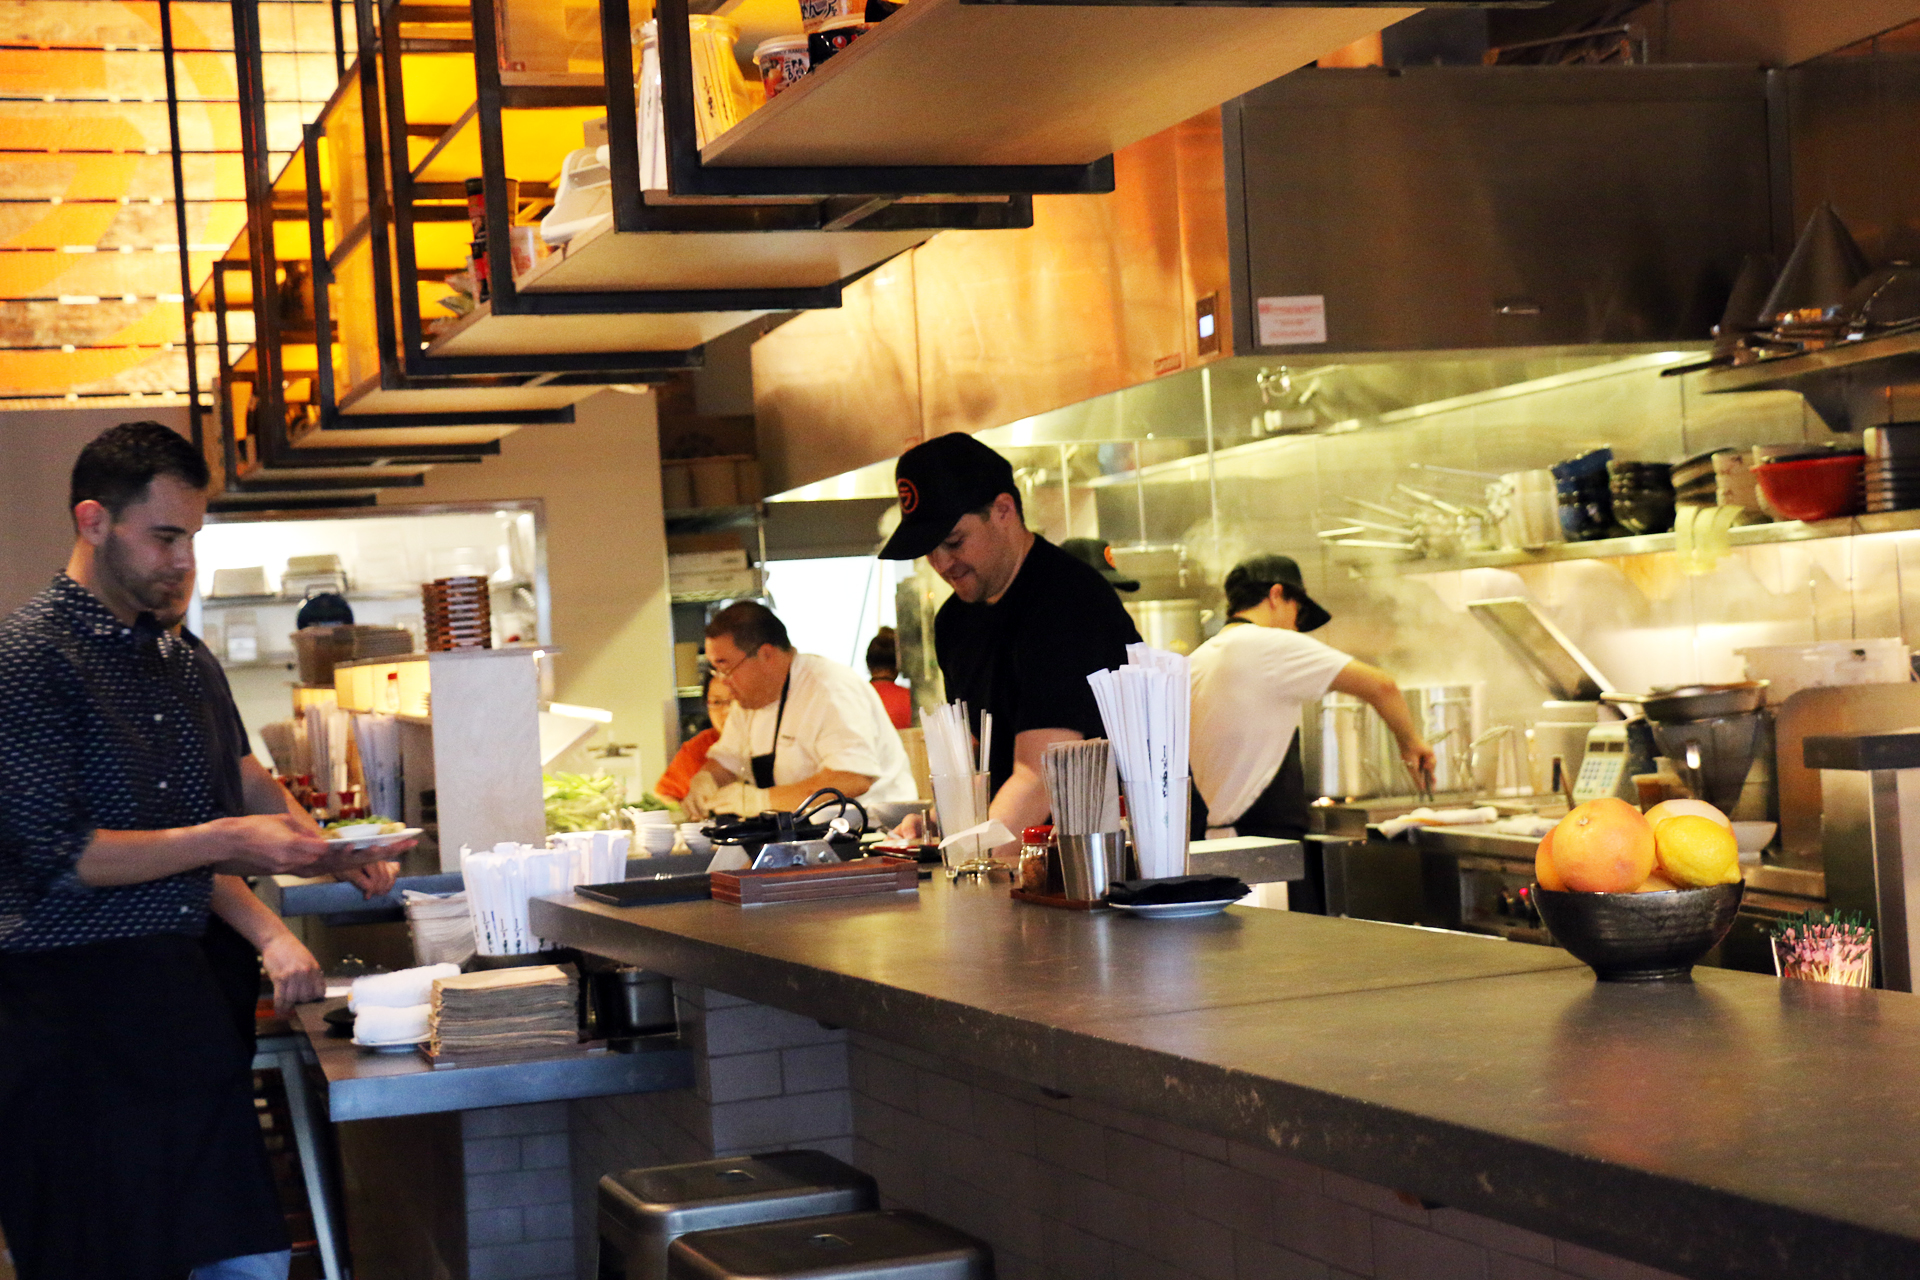 The fast-paced open kitchen at Itani Ramen.